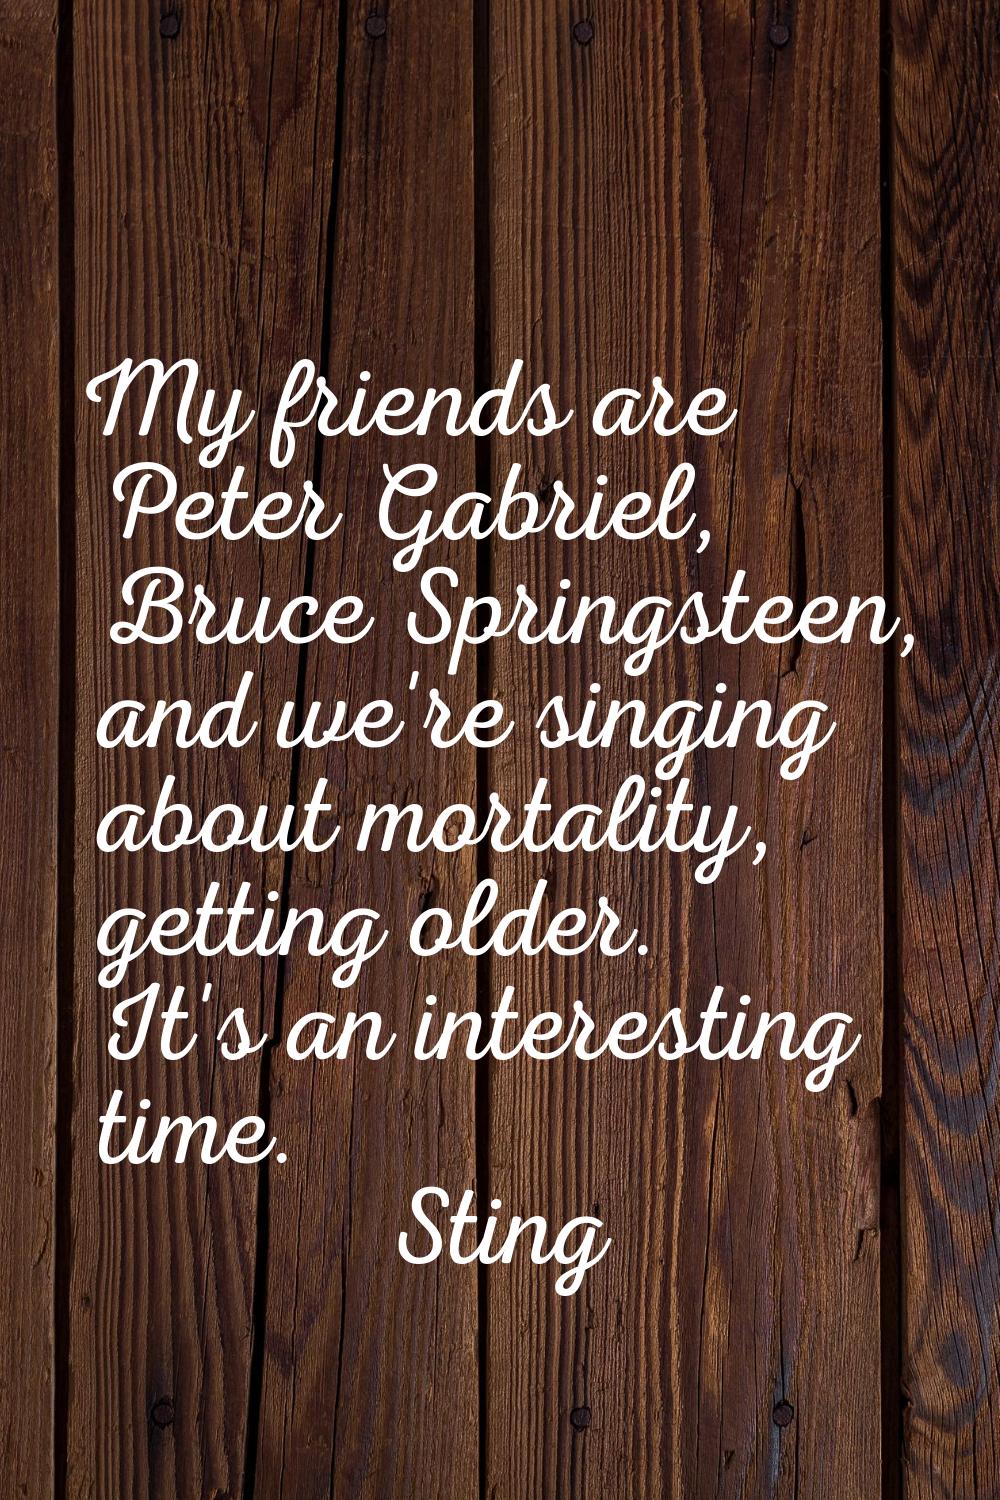 My friends are Peter Gabriel, Bruce Springsteen, and we're singing about mortality, getting older. 